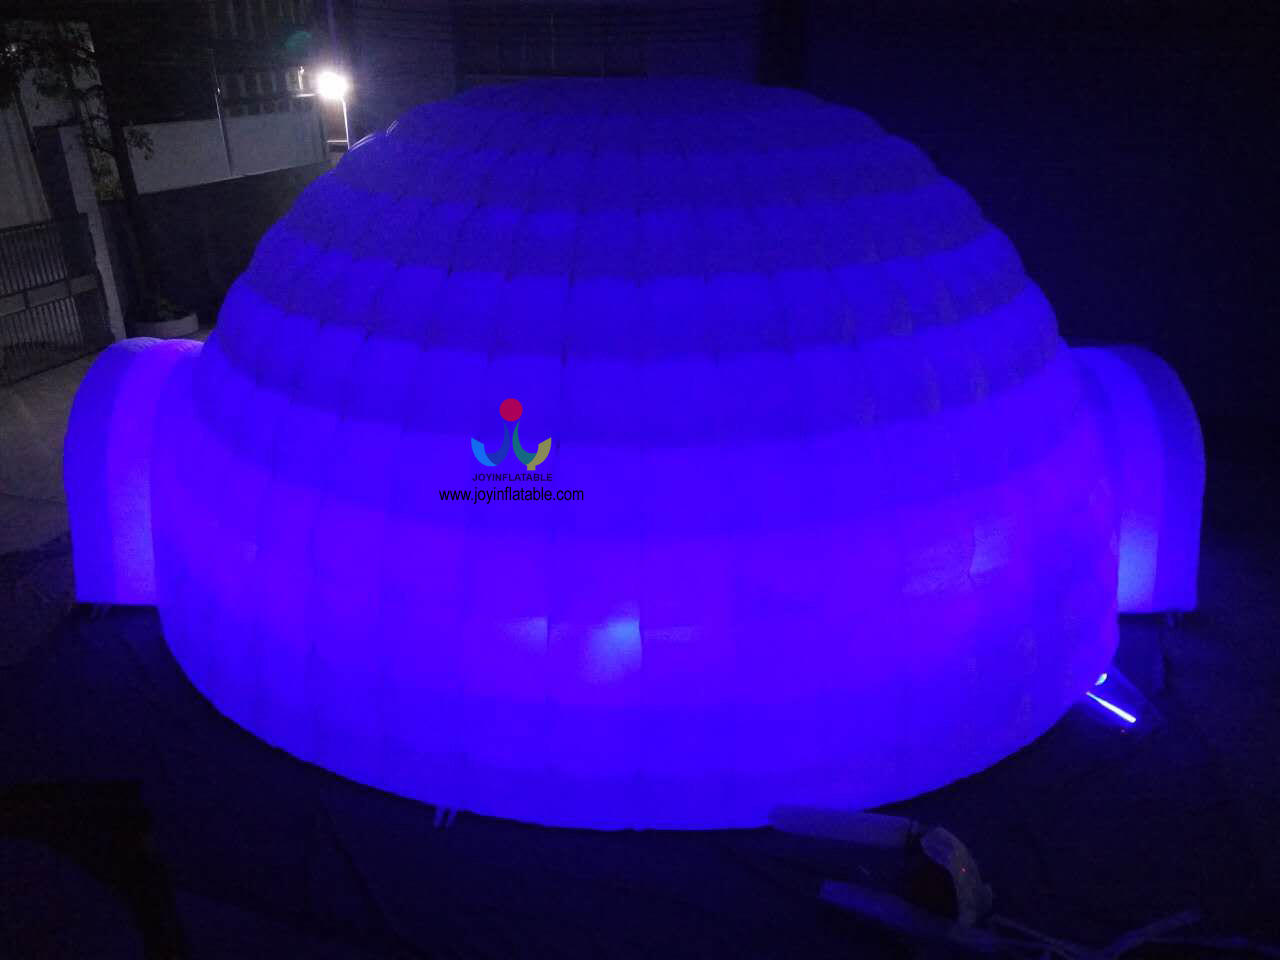 sale igloo disco blow inflatable tent manufacturers JOY inflatable Brand